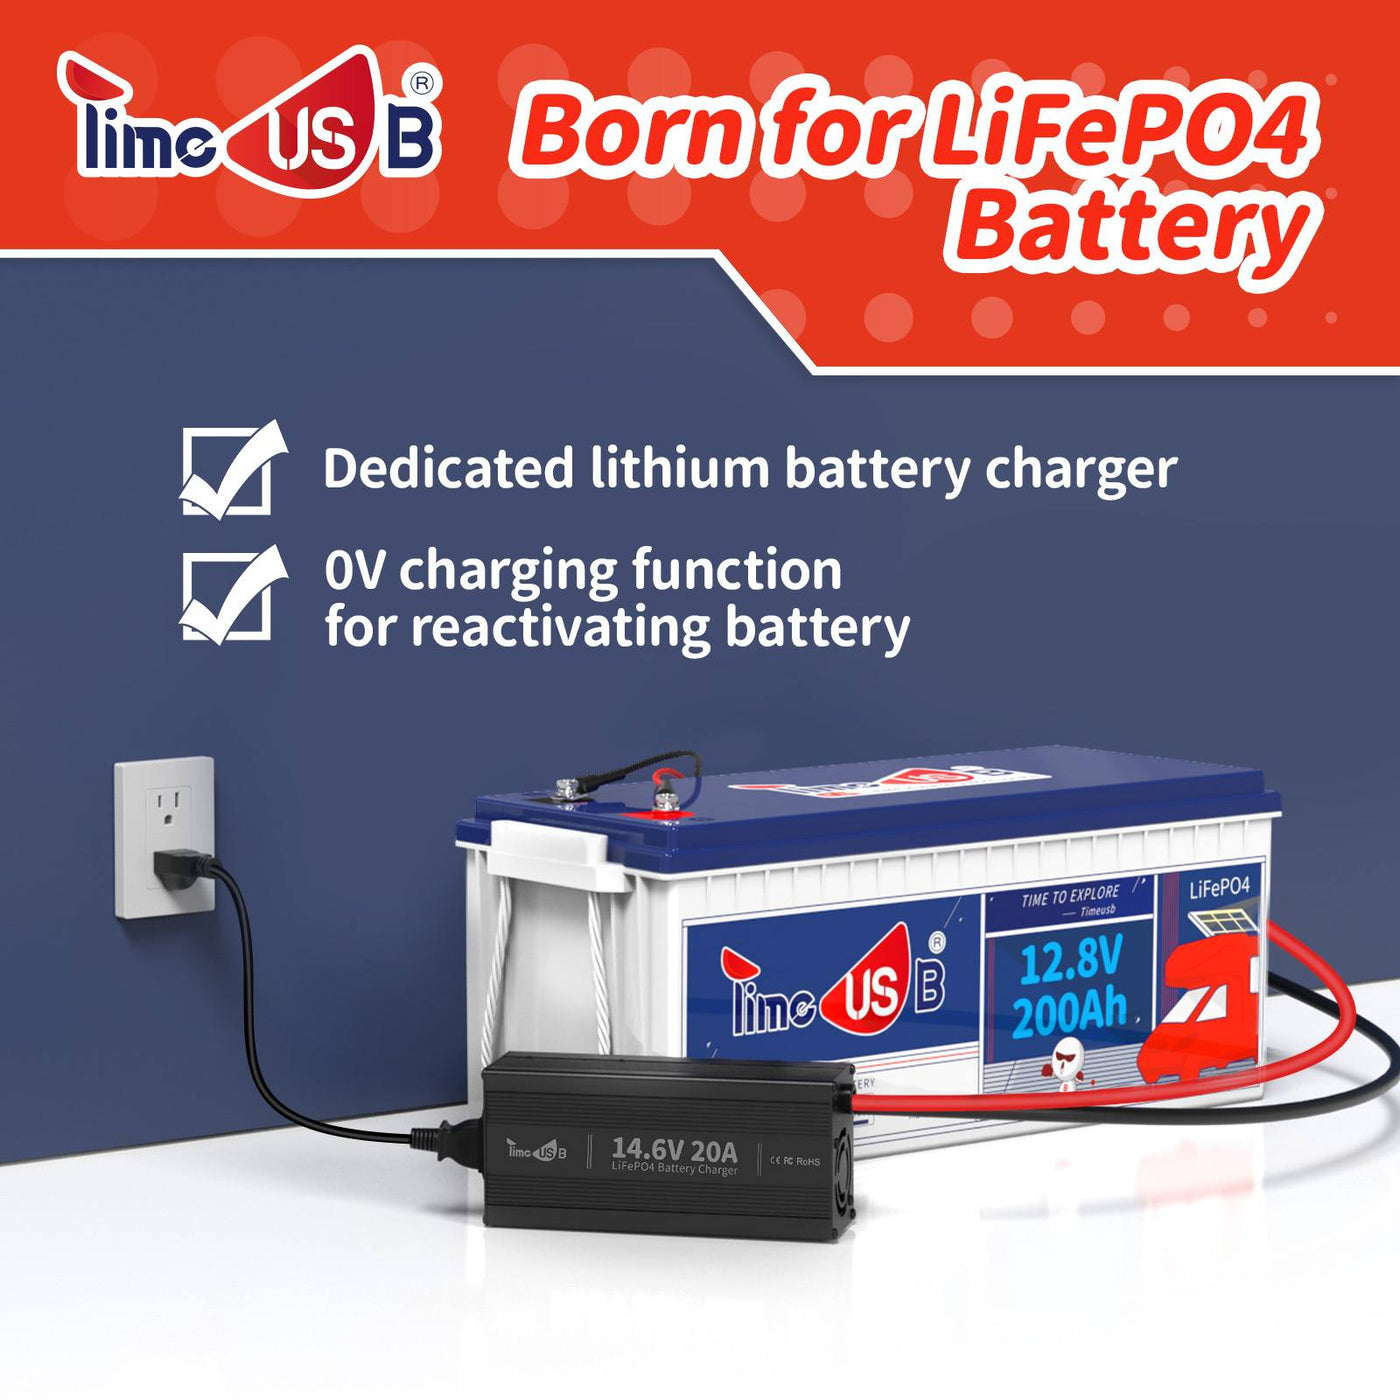 [Final: ＄66.49] Timeusb 14.6V 20A Fast Charging LiFePO4 Battery Charger